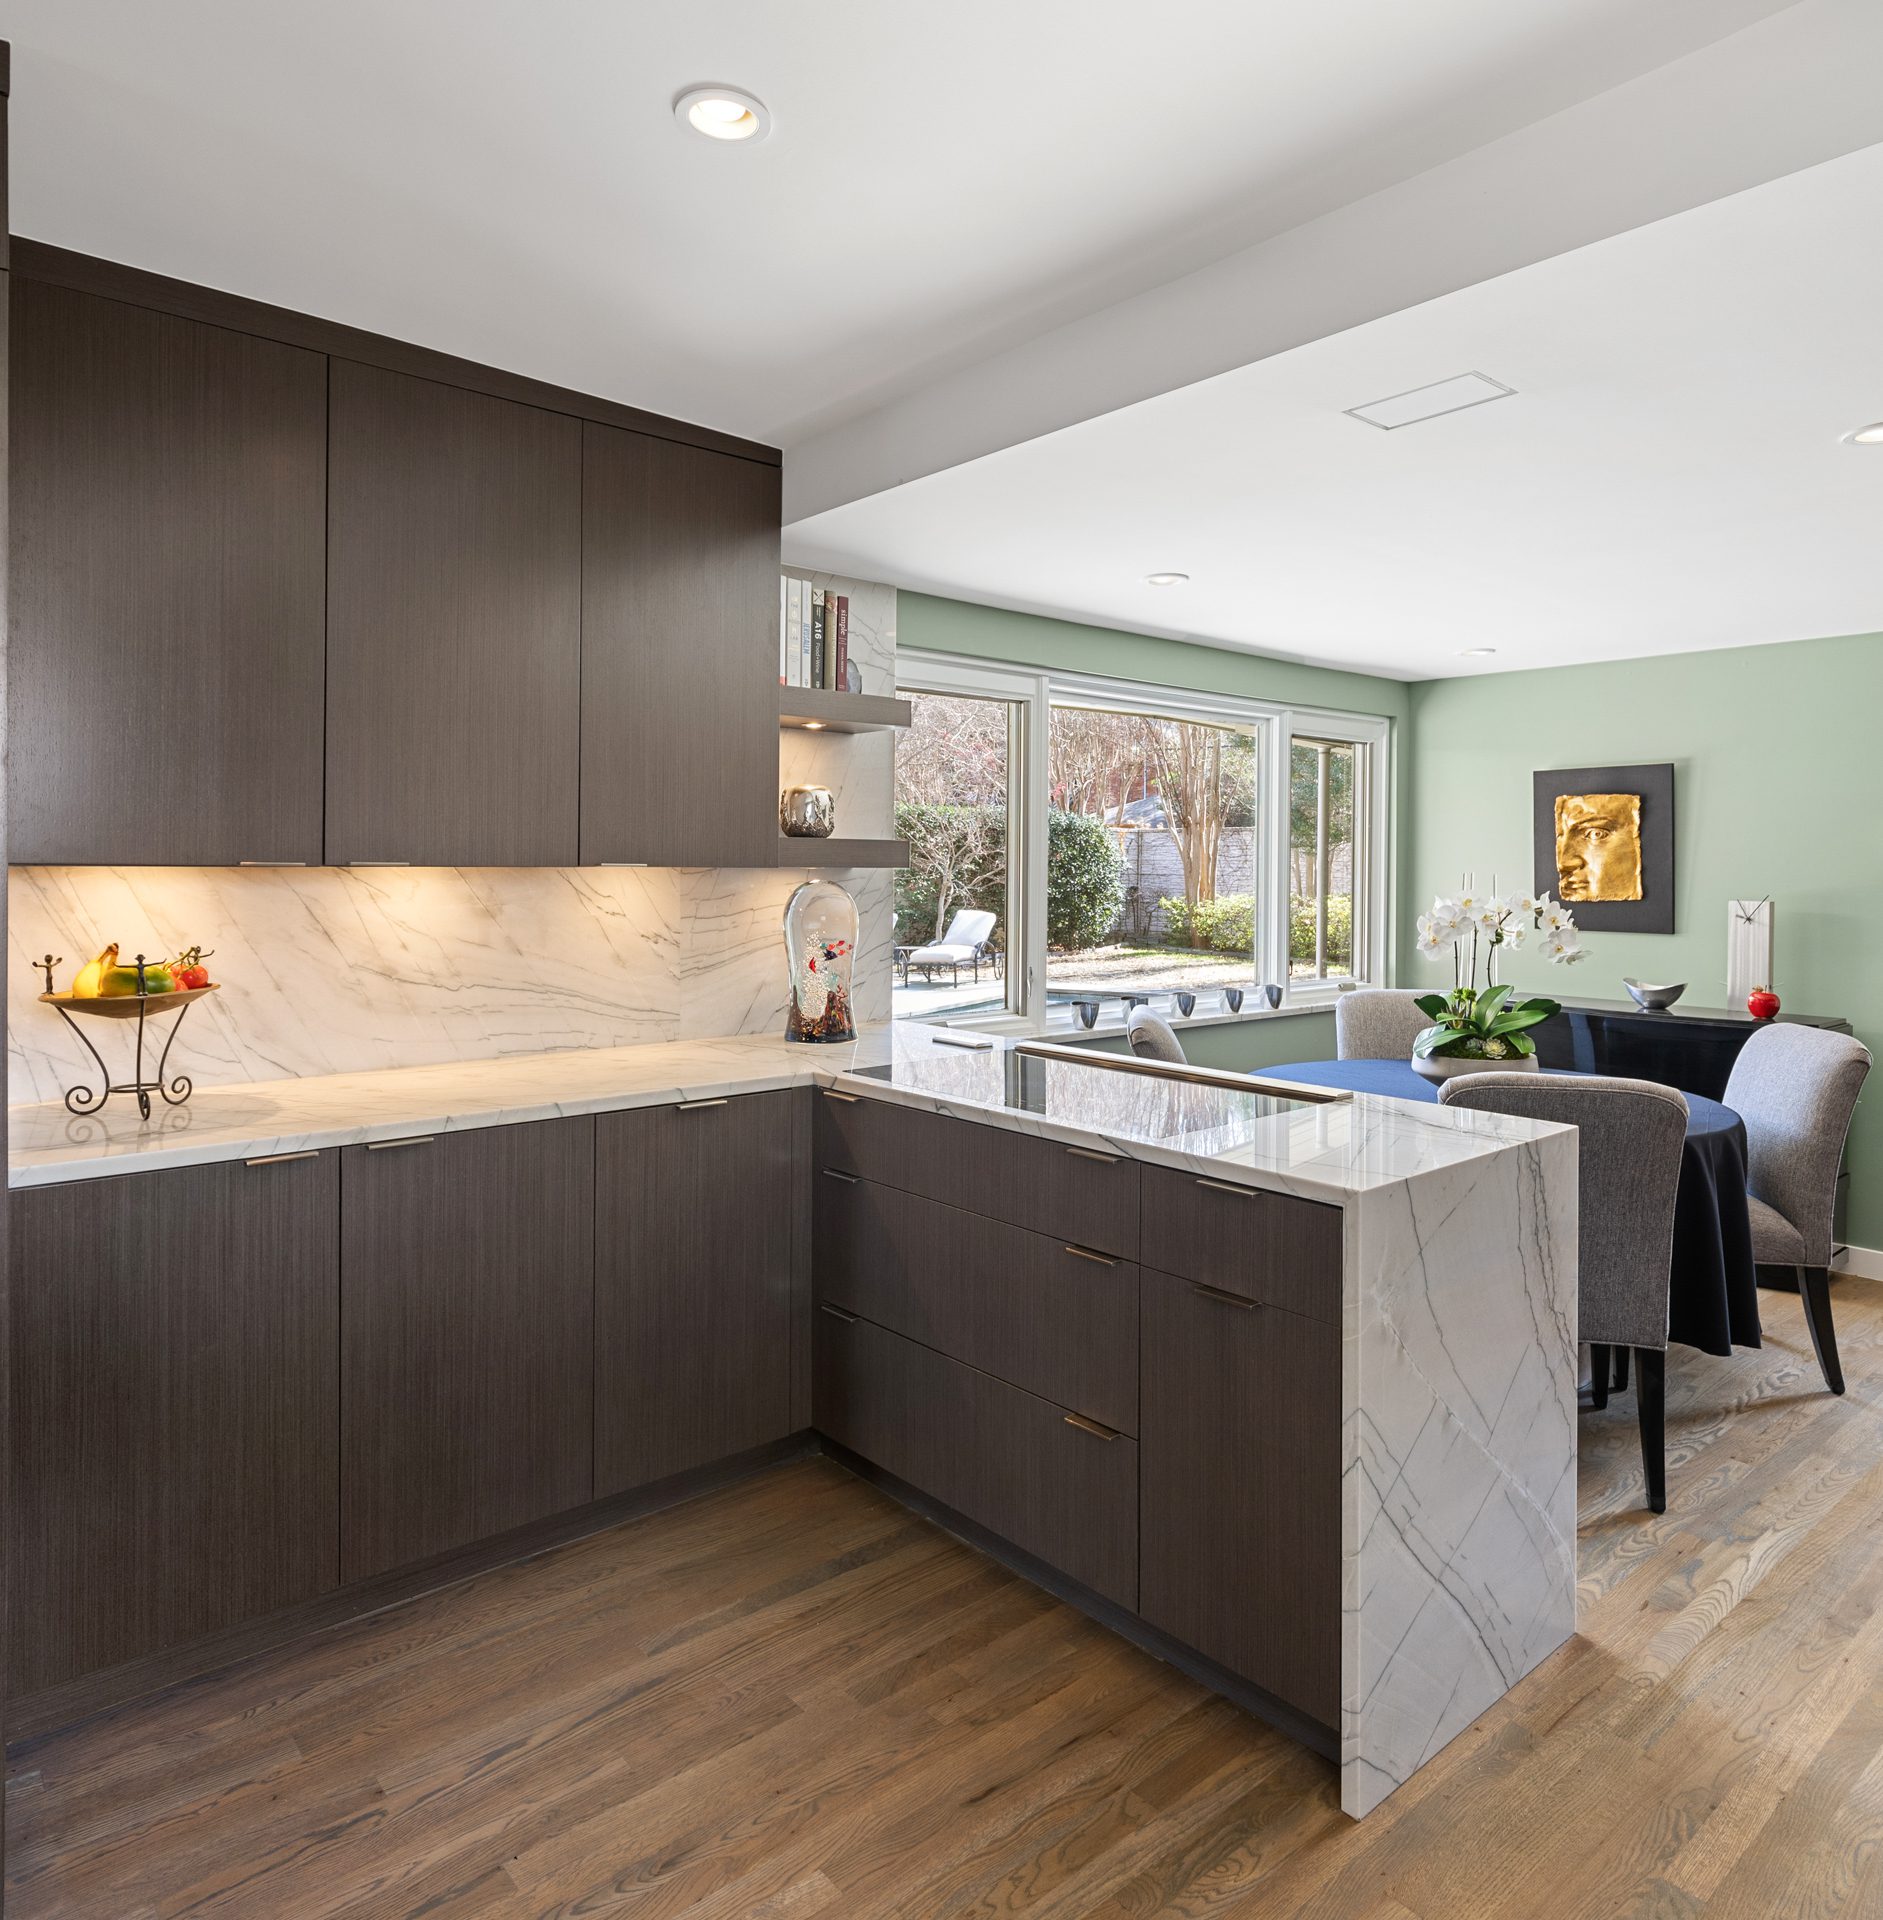 The New kitchen features a peninsula with a natural stone countertop and waterfall